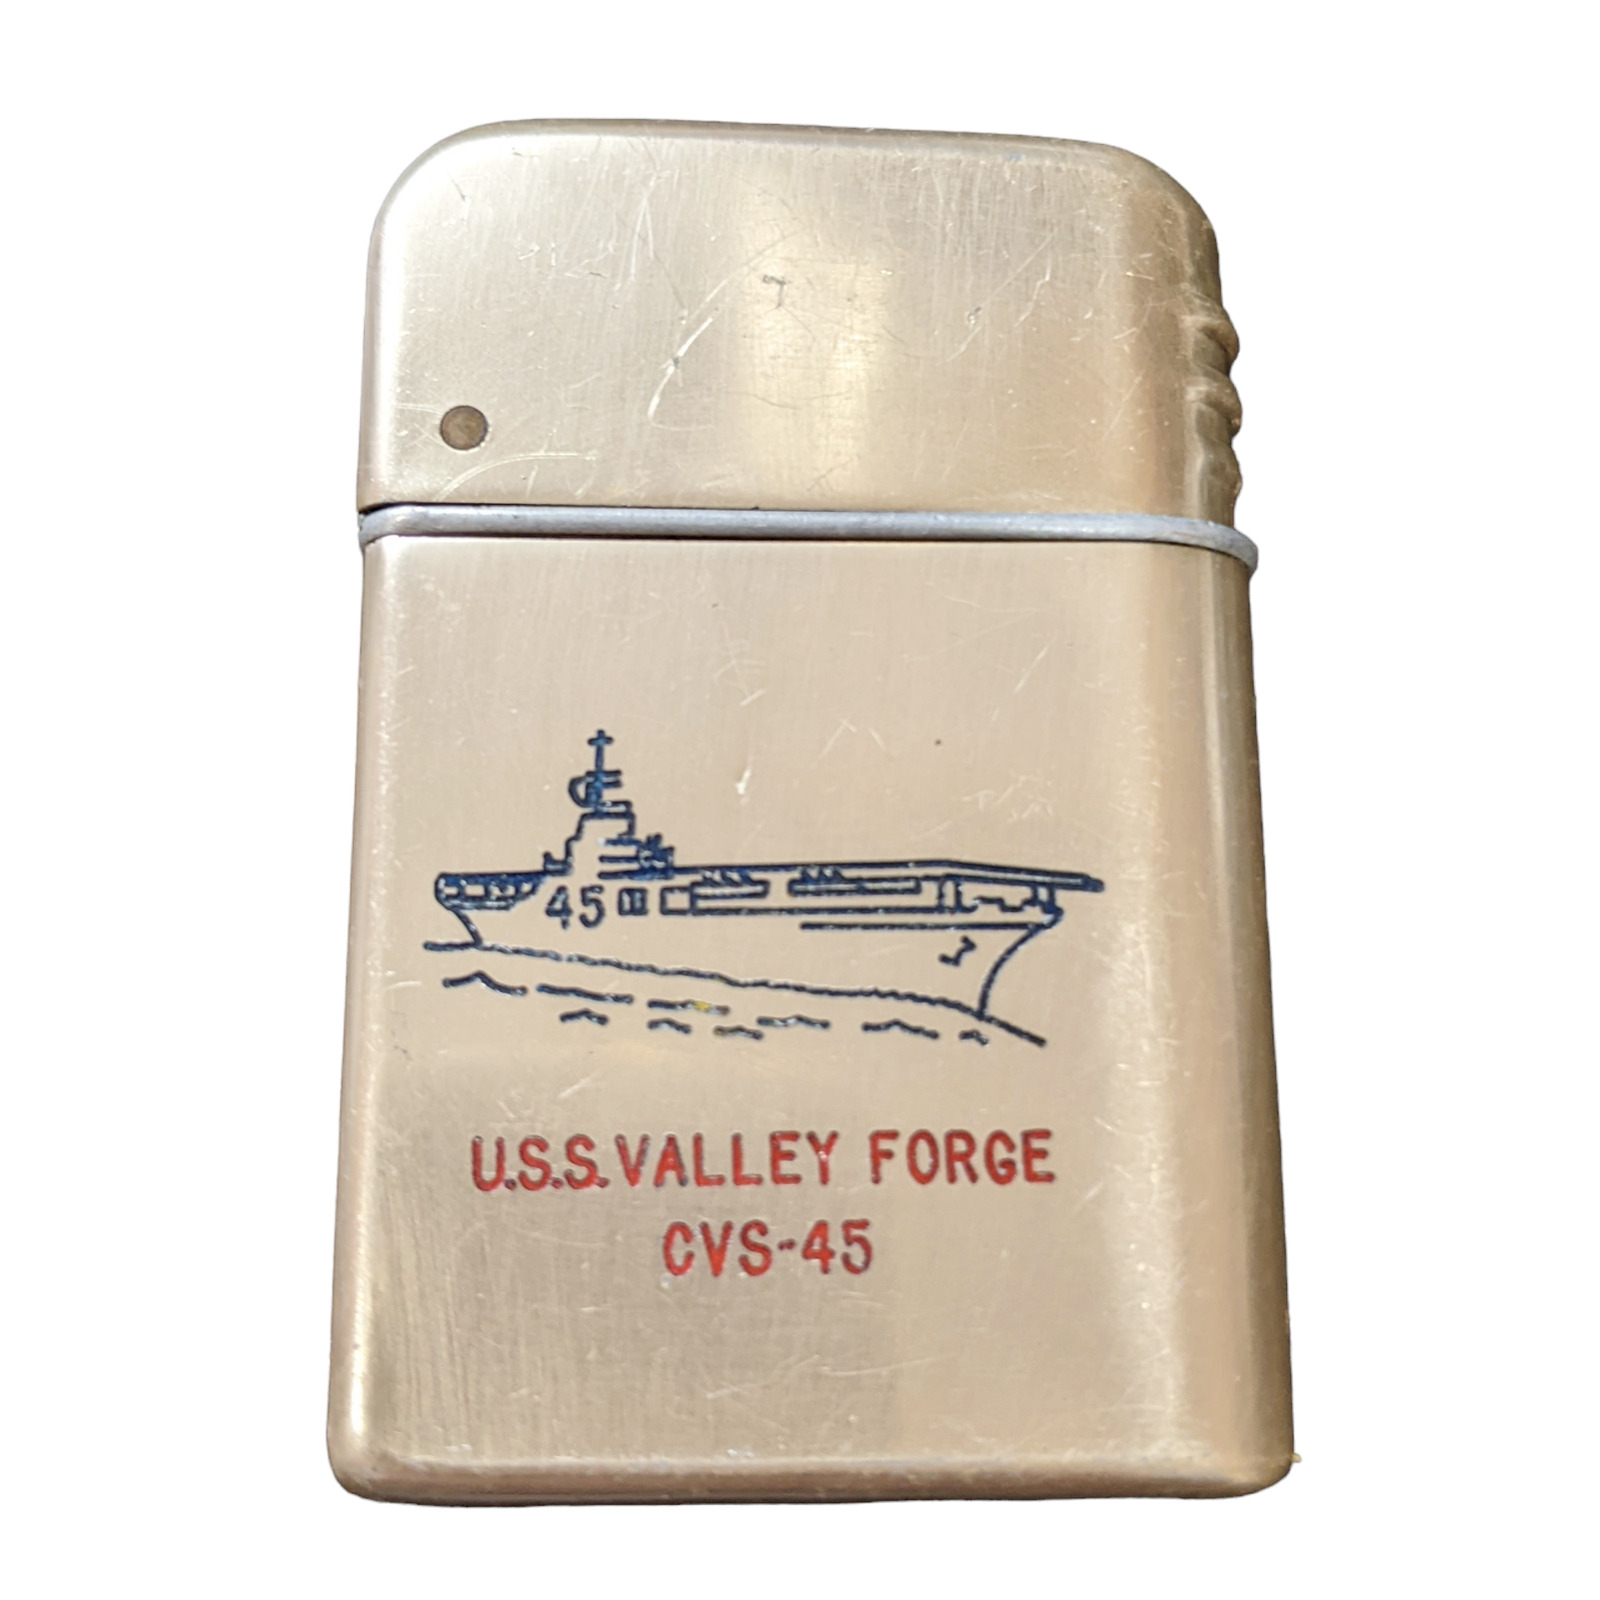 Bowers Sure Fire lighter Made in USA U.S.S Valley Forge CVS-45 military Navy WWI